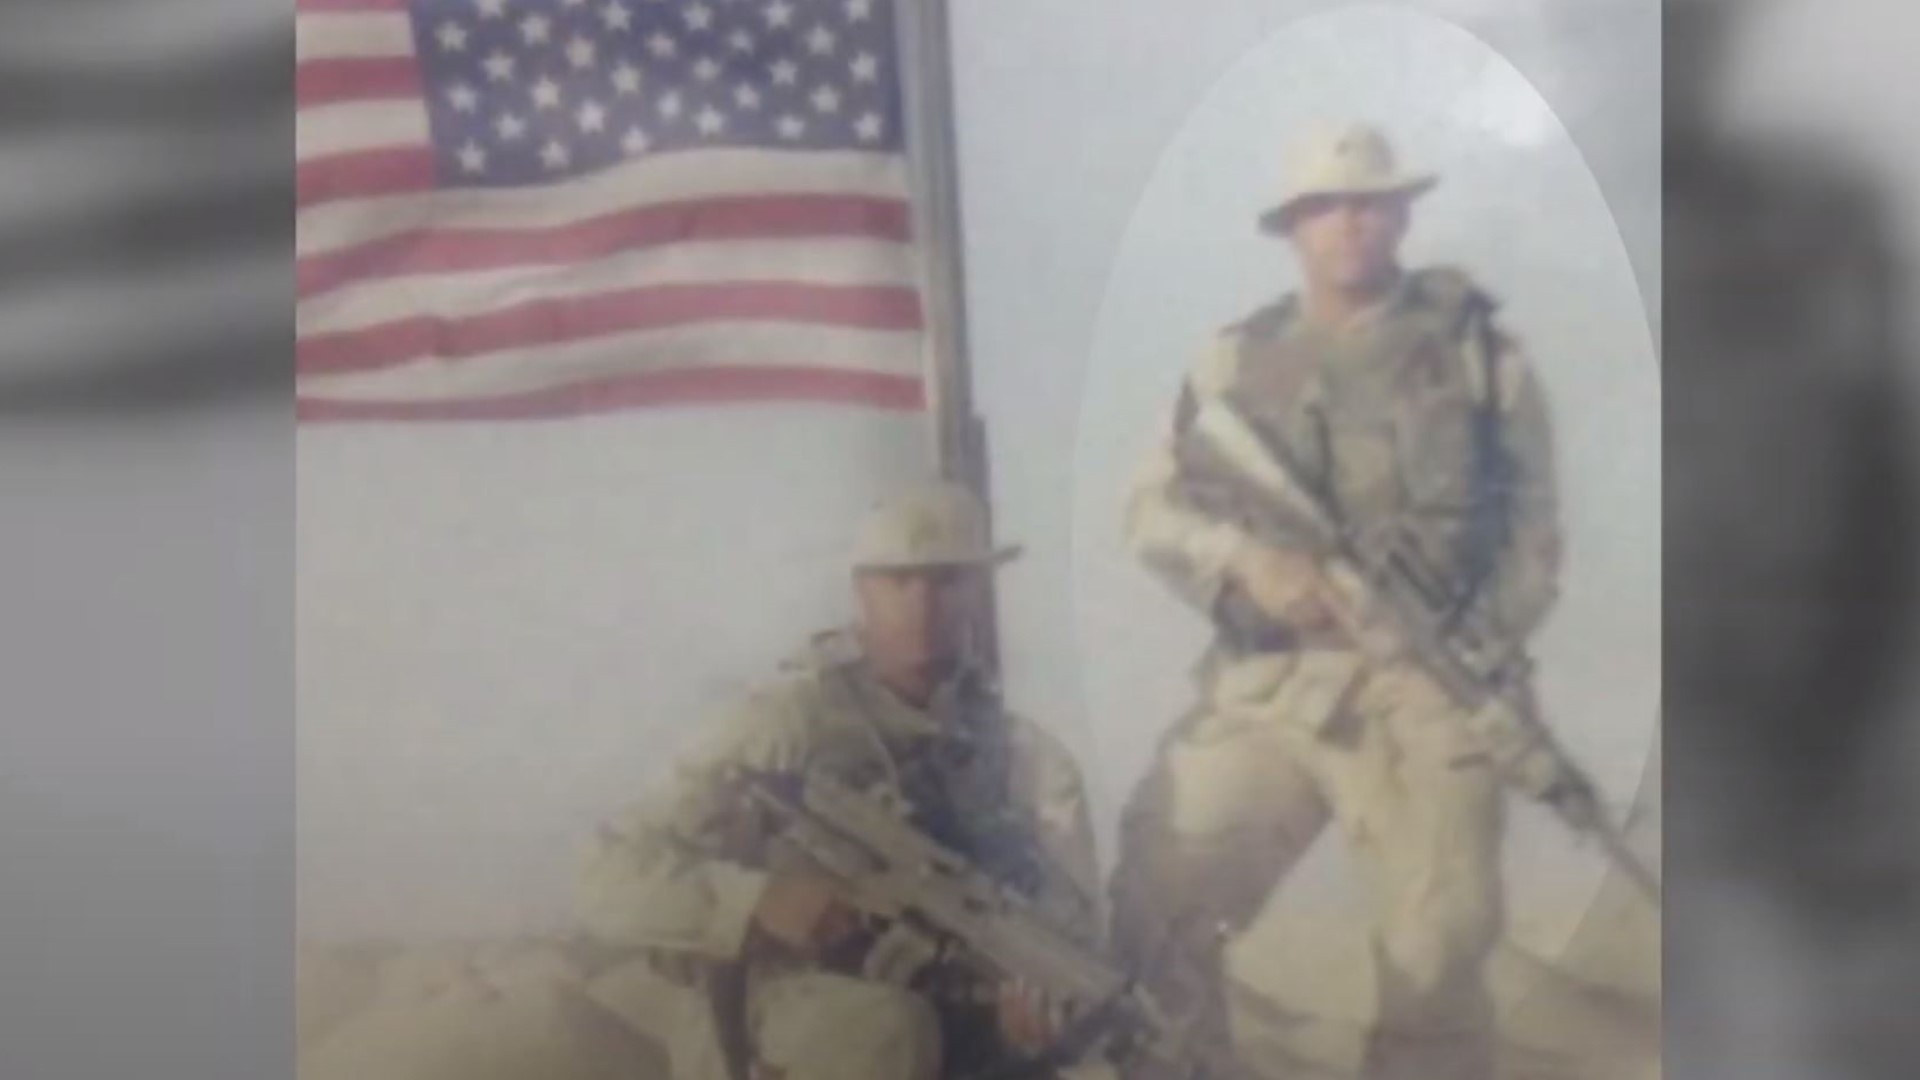 Two Gwinnett County army veterans were among thousands of soldiers and marines invading Iraq.